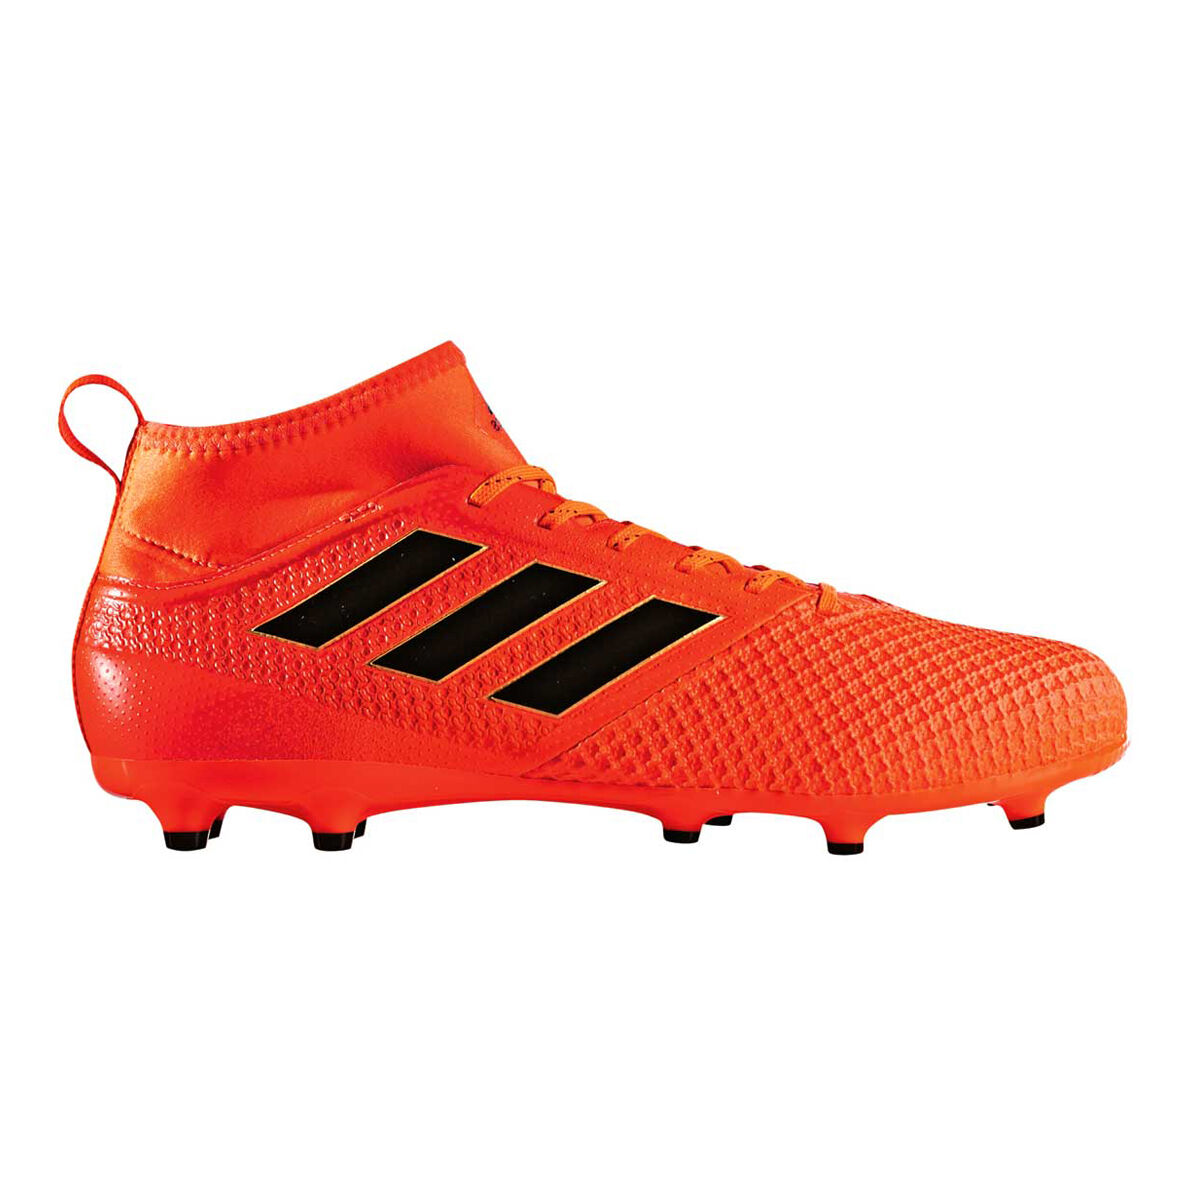 adidas ace 17.3 red and black